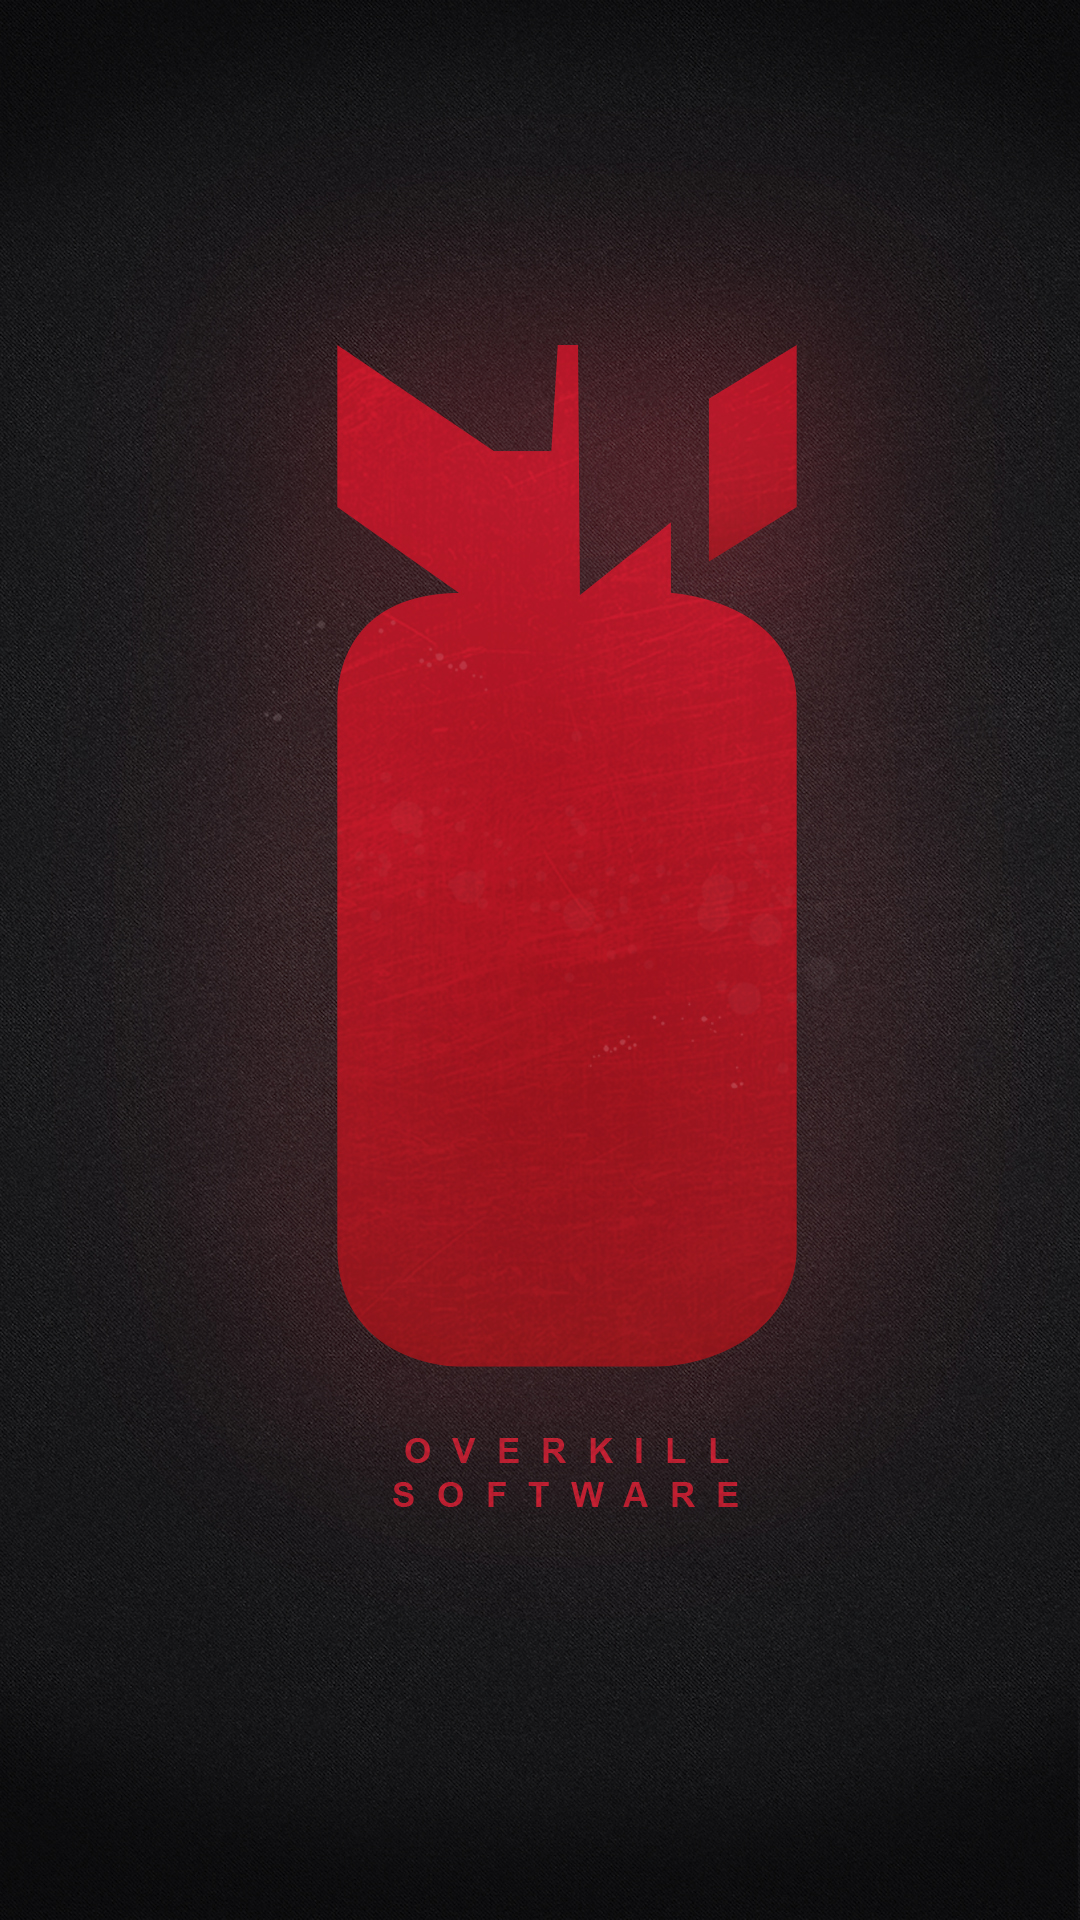 Overkill Software Best Htc One Wallpaper And Easy